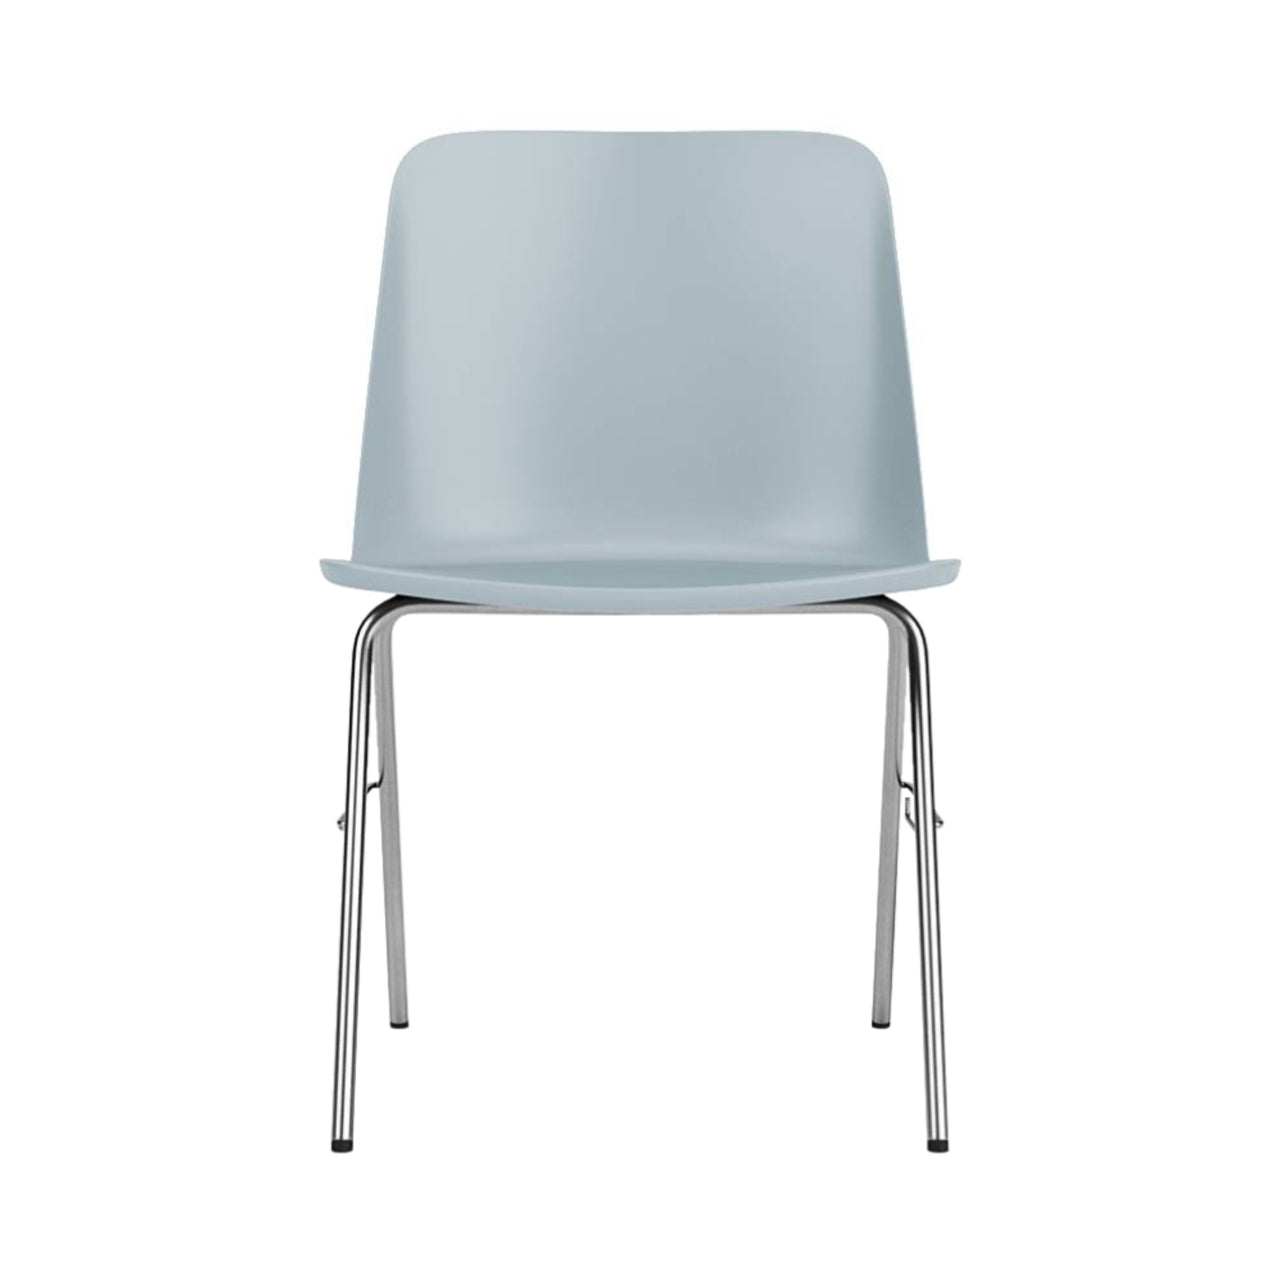 Rely Chair HW27: Light Blue